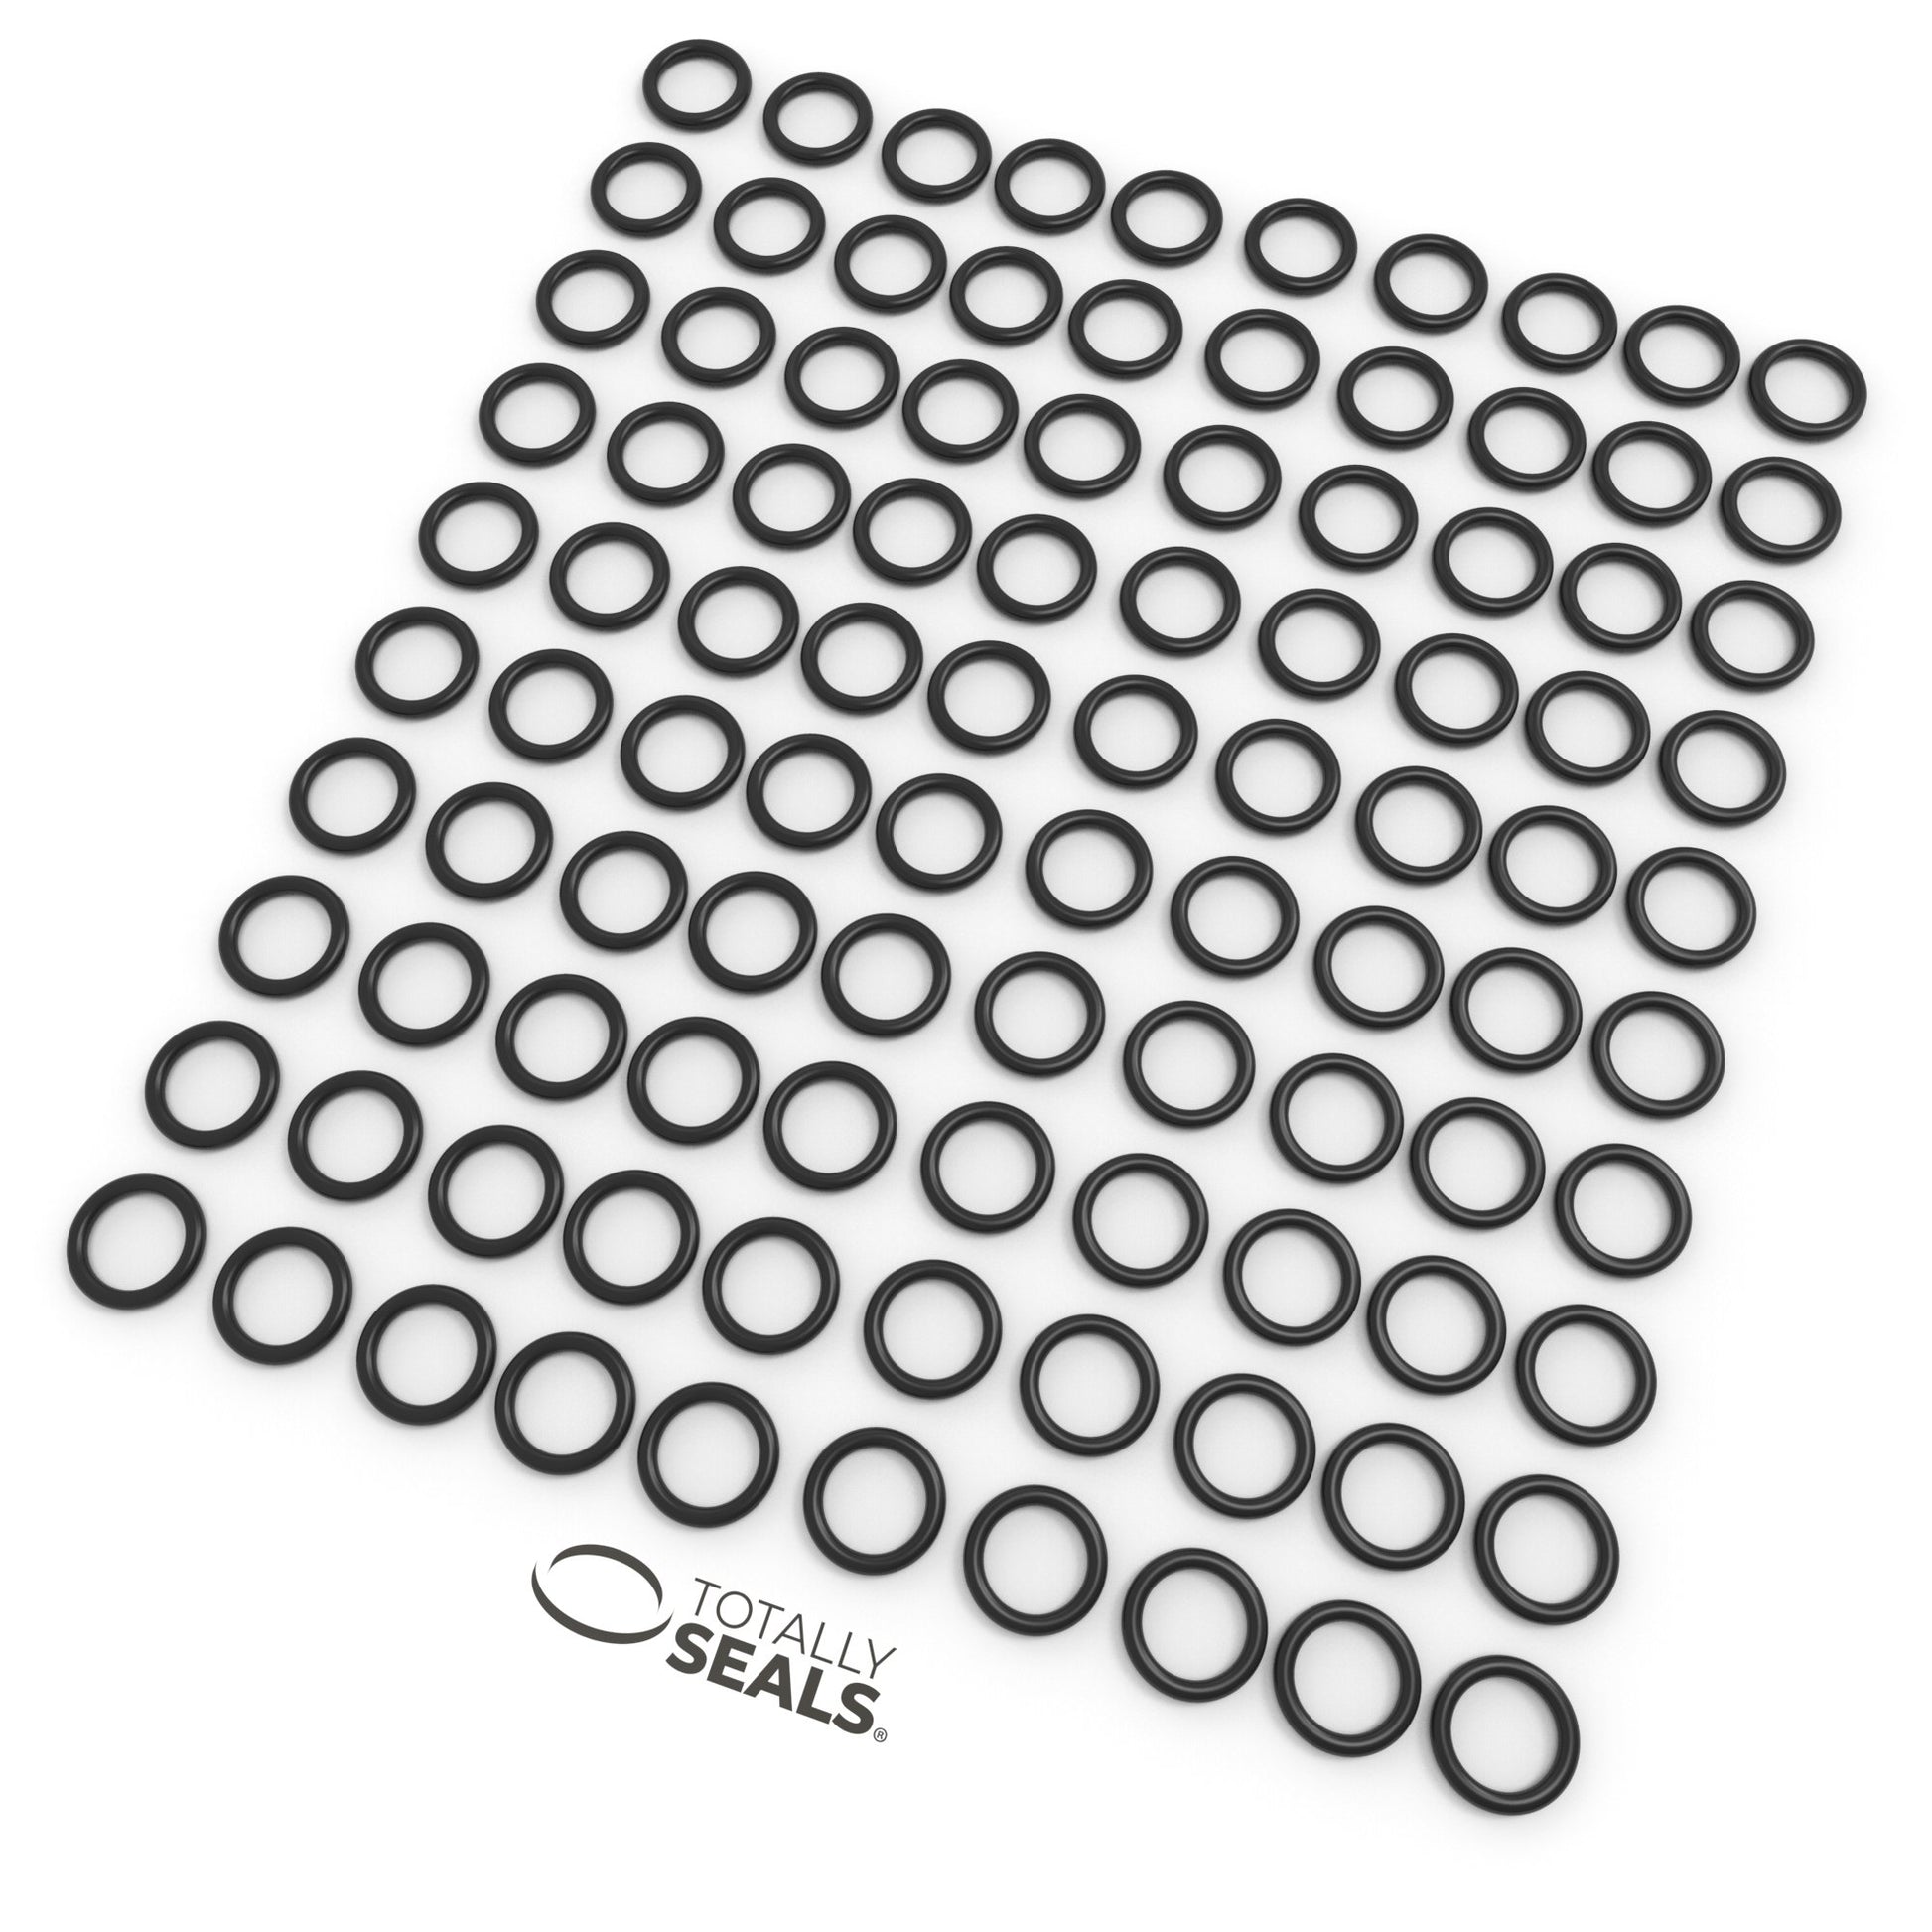 1/4" x 3/32" (BS108) Imperial Nitrile O-Rings - Totally Seals®